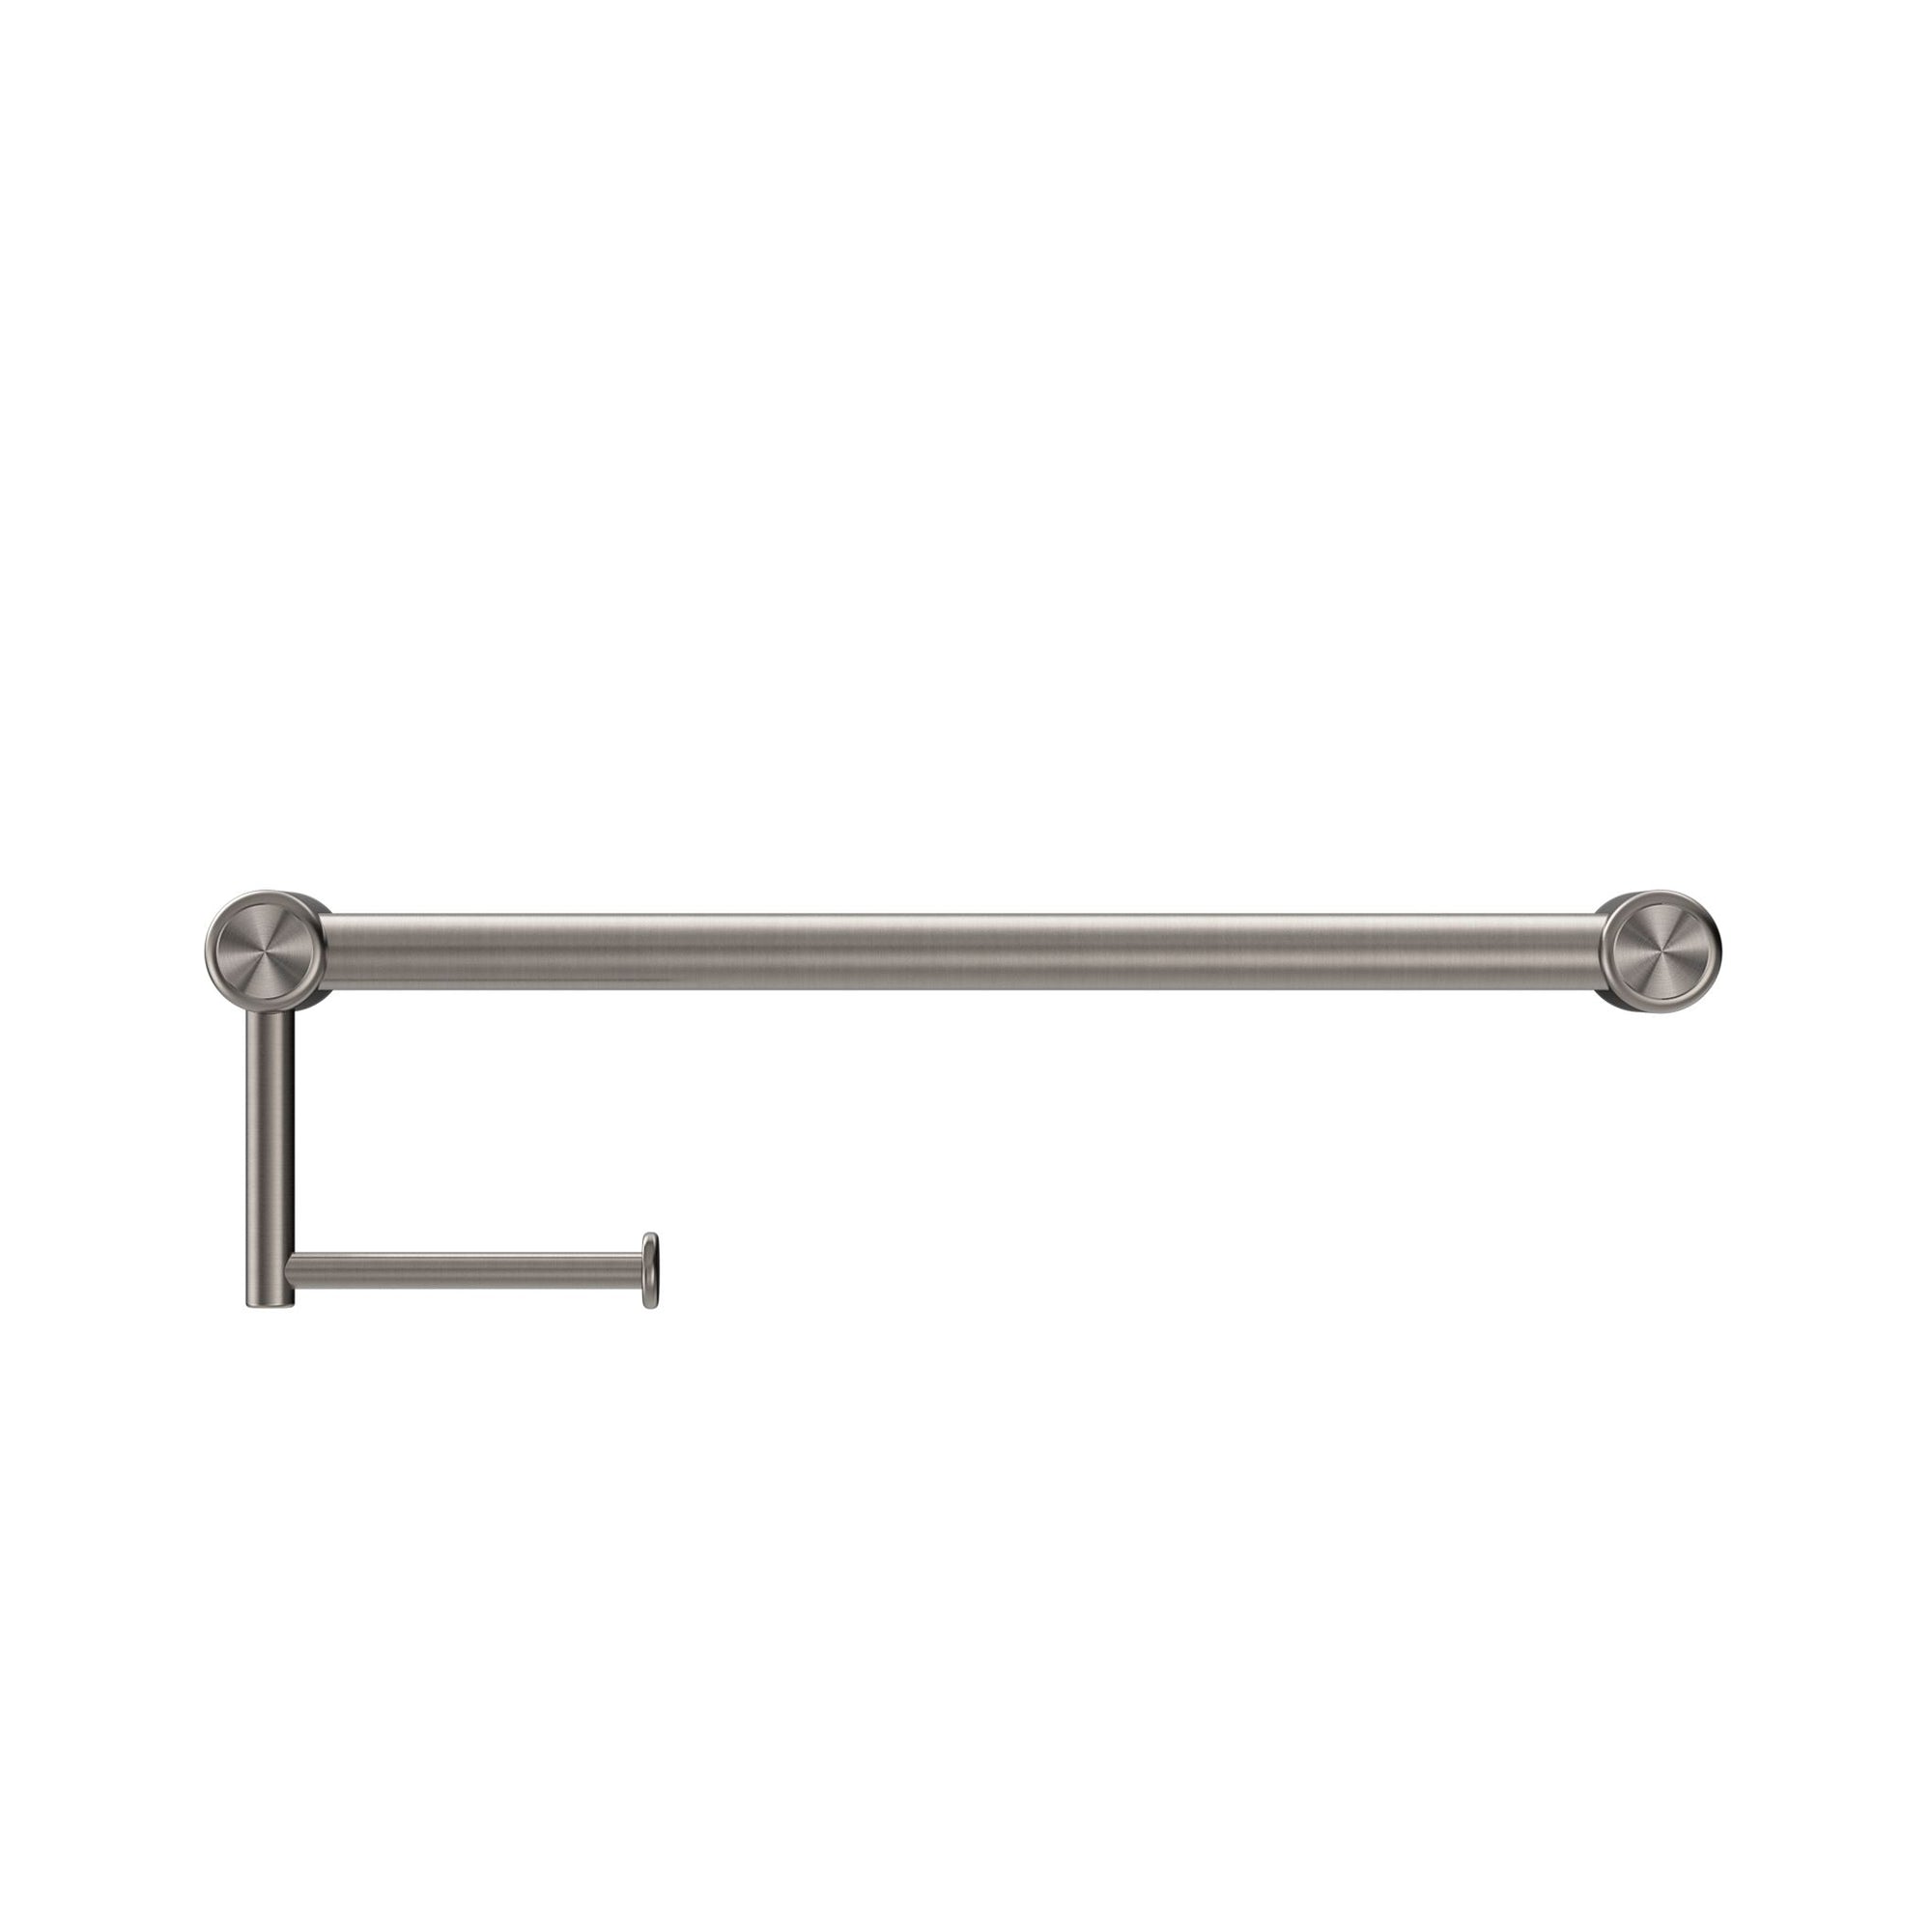 MECCA CARE 25MM TOILET ROLL RAIL 300/450MM BRUSHED NICKEL Accessories Nero 300mm 